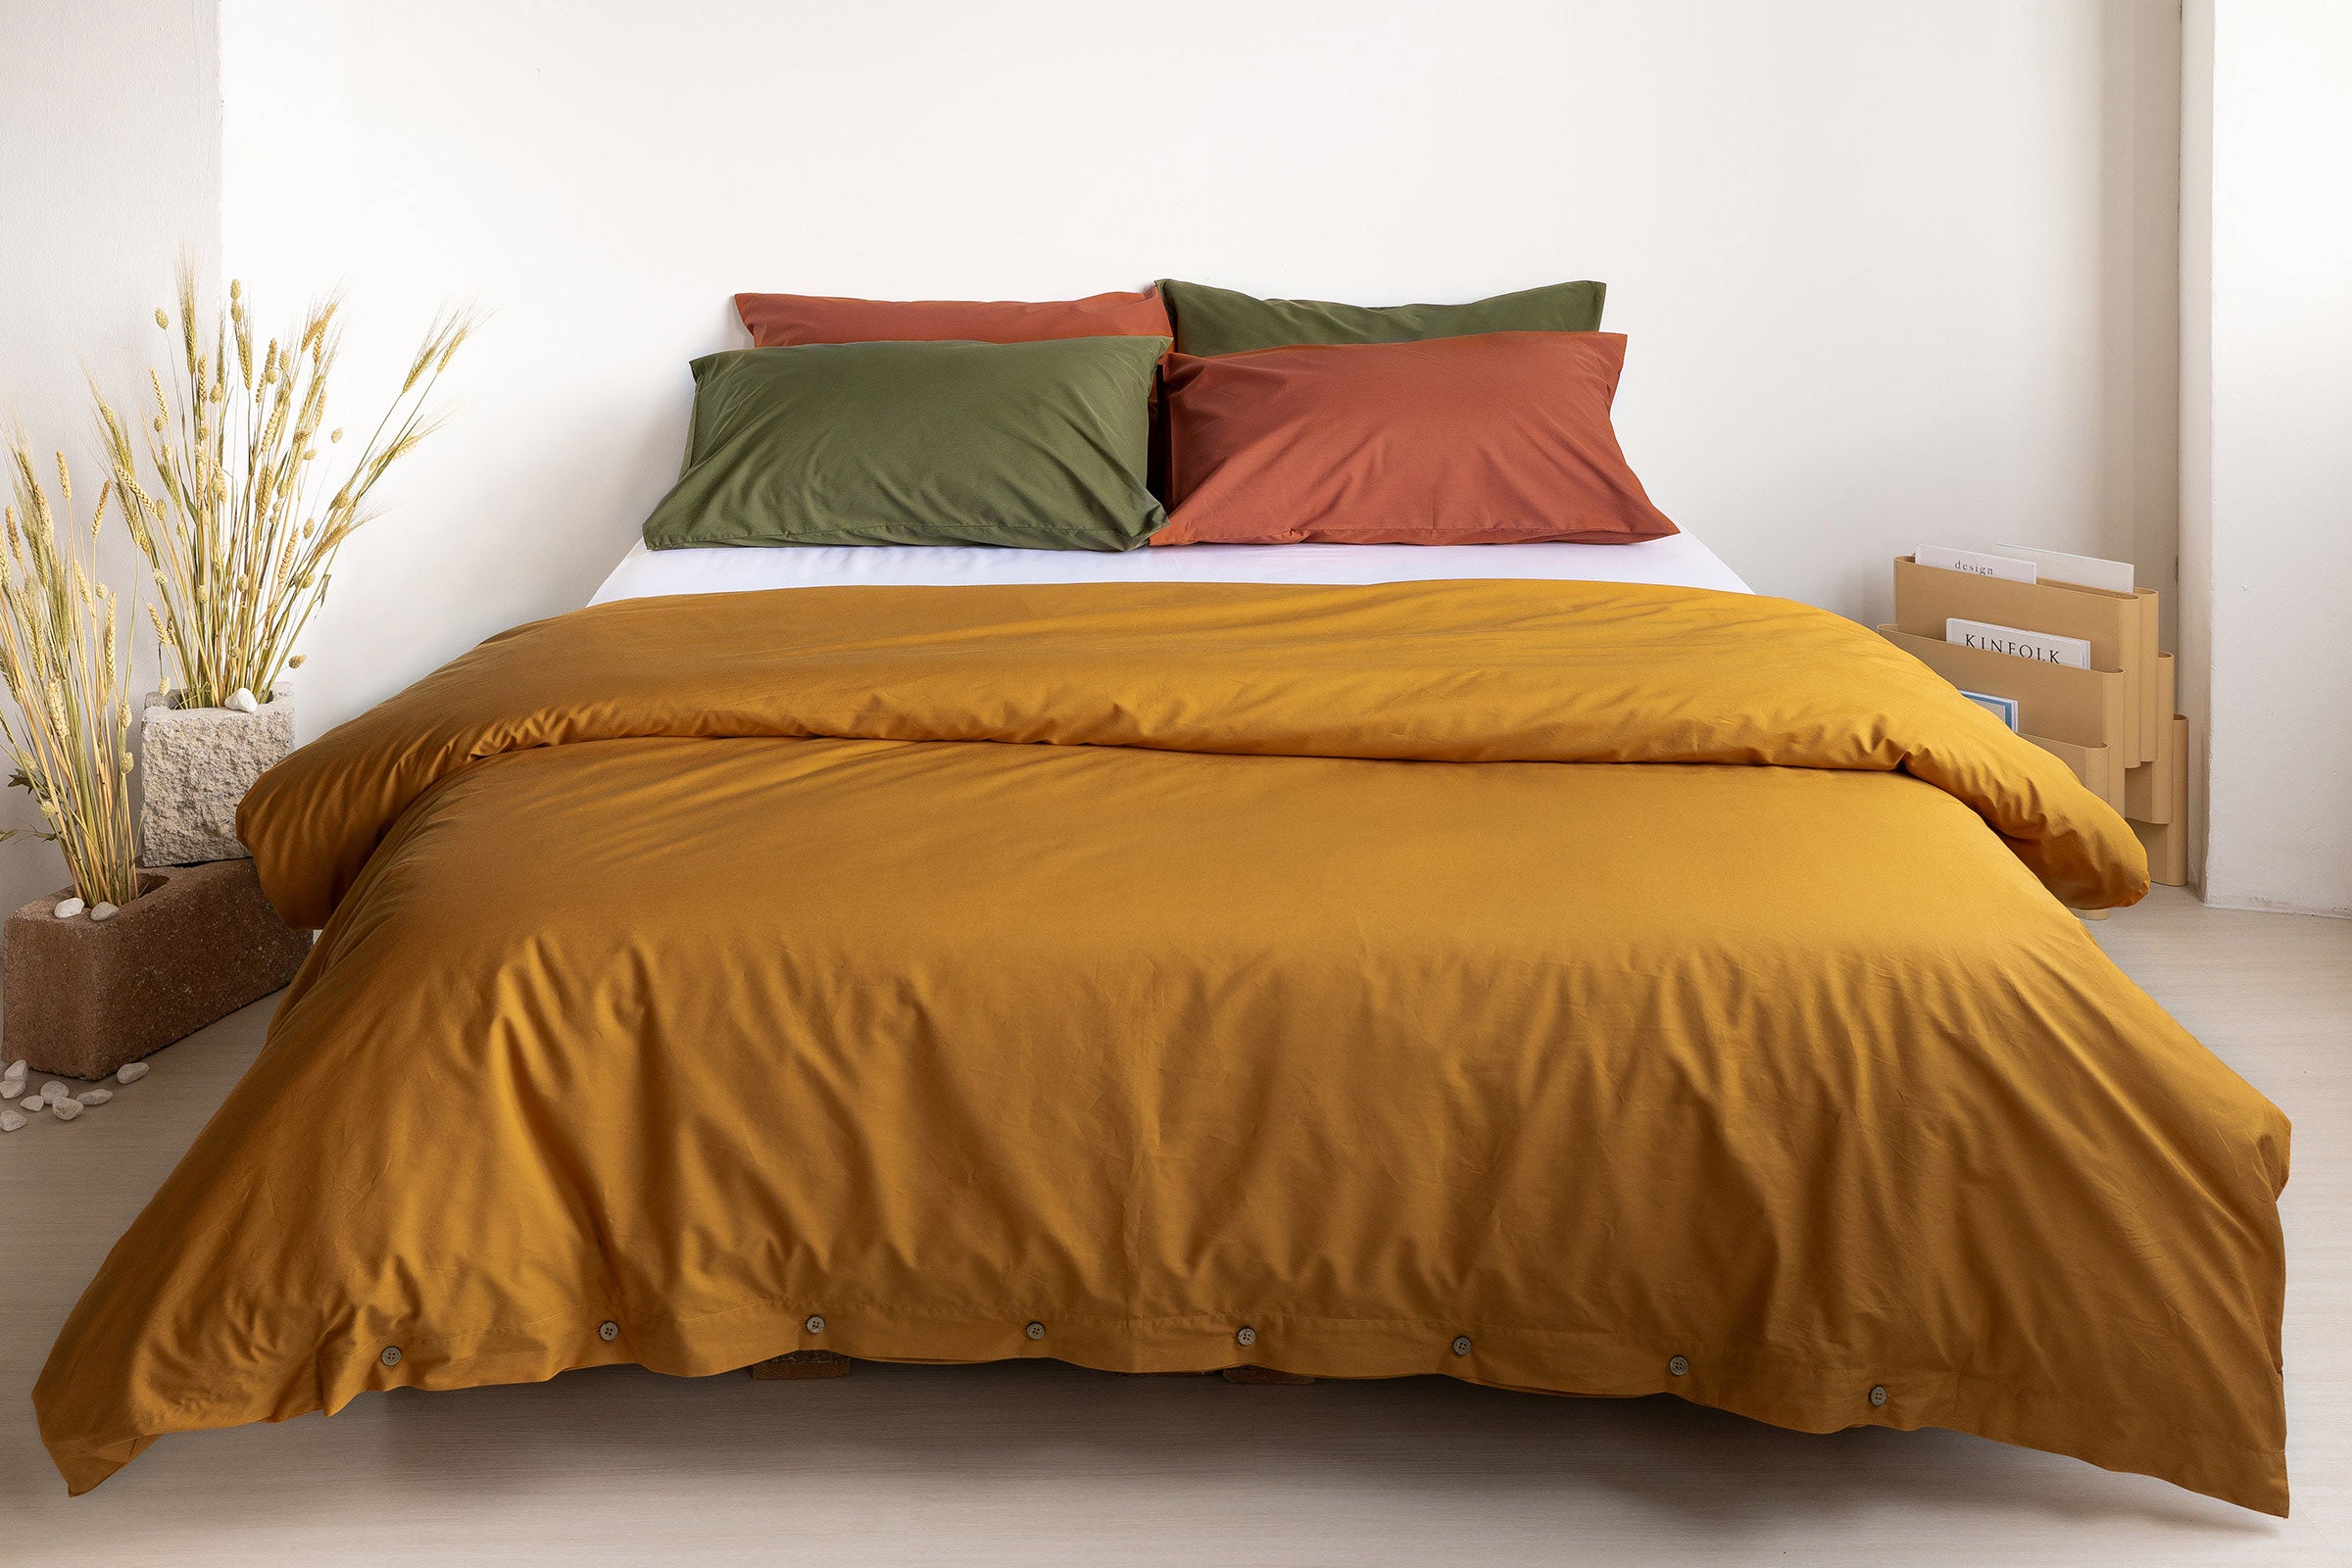 crisp-mustard-duvet-cover-white-fitted-sheet-olive-clay-pillowcase-pair-by-sojao.jpg